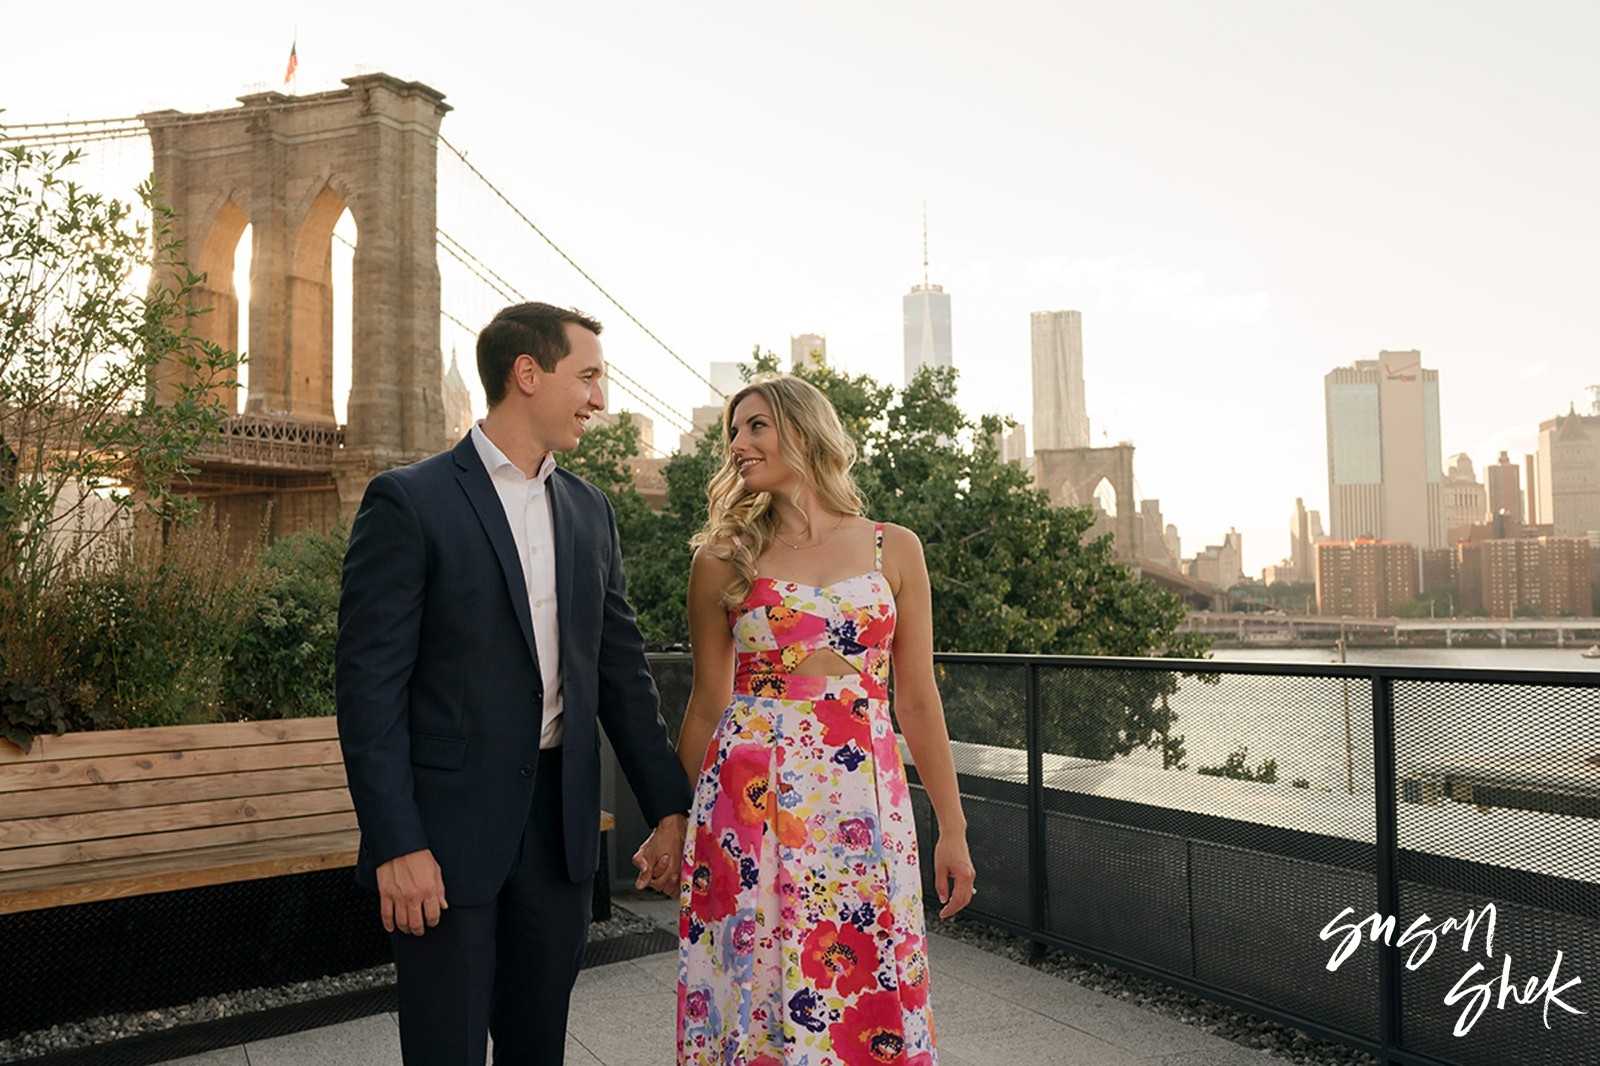 Empire Stores Engagement, Engagement Shoot, NYC Engagement Photographer, Engagement Session, Engagement Photography, Engagement Photographer, NYC Wedding Photographer